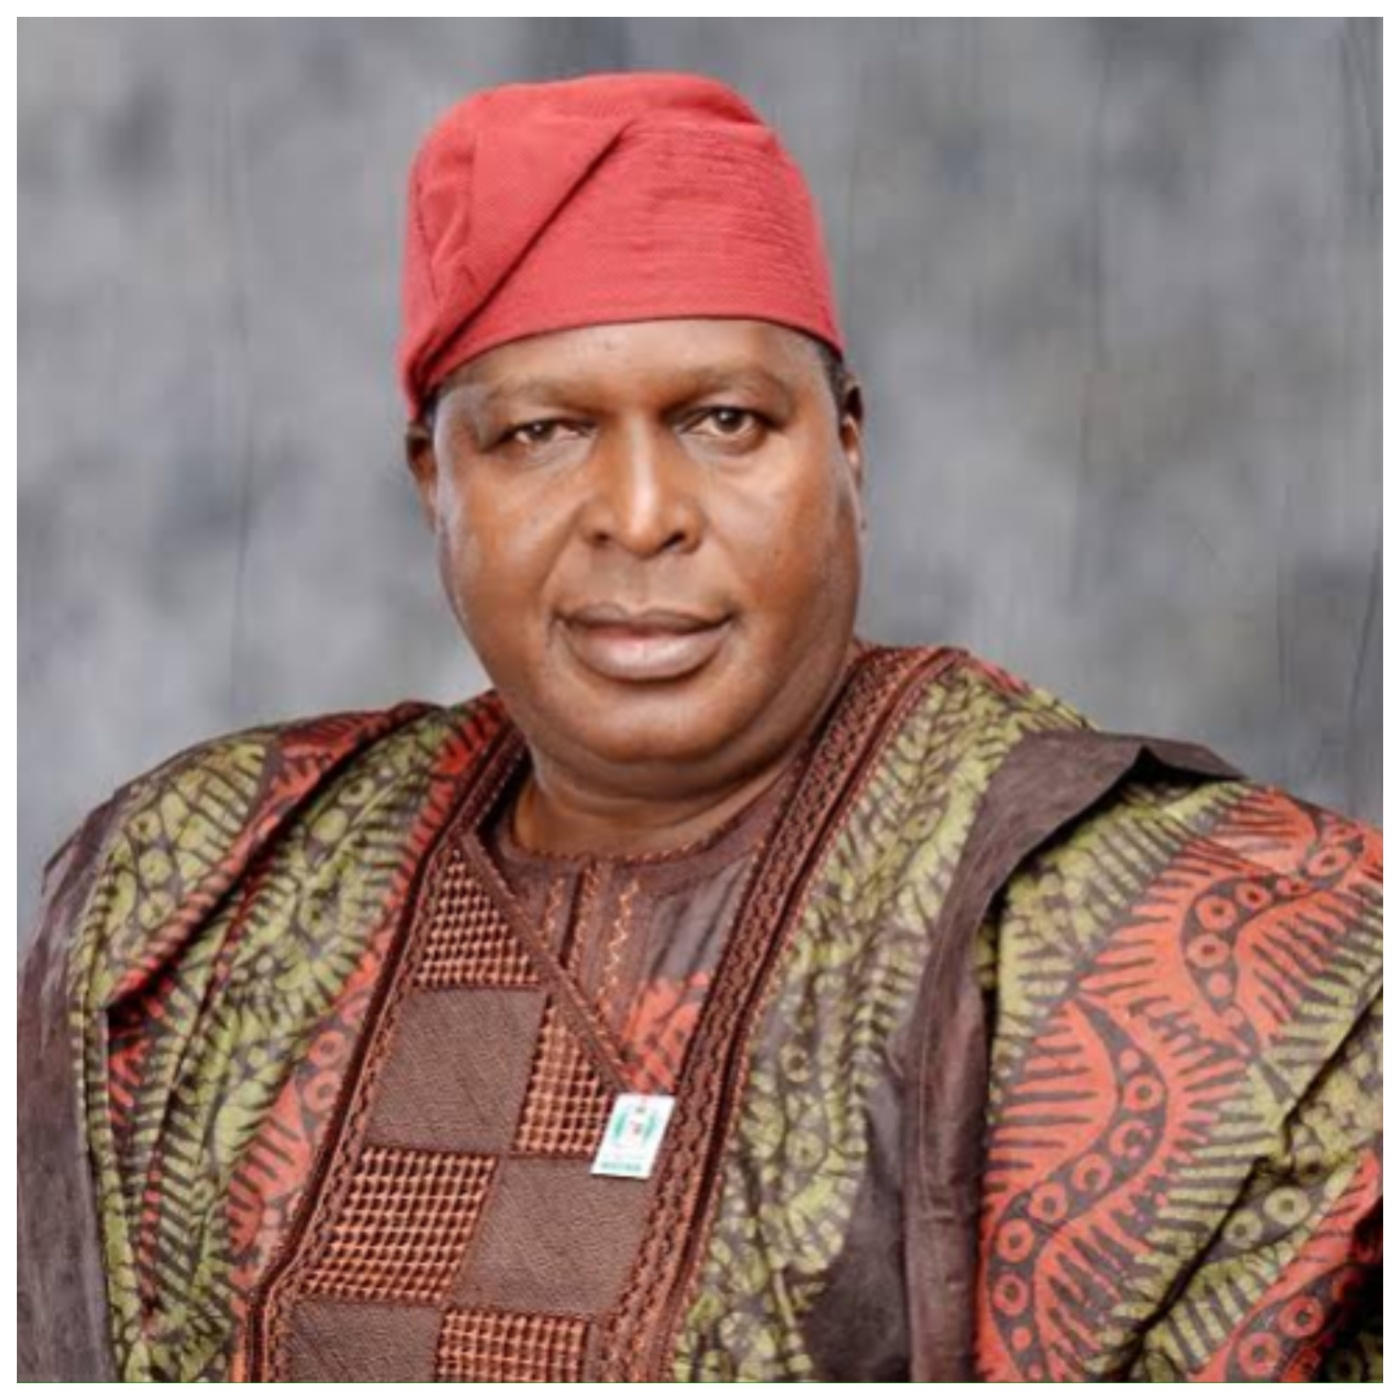 Fortify Naira by utilising Nigeria's cultural assets - NCAC boss to FG